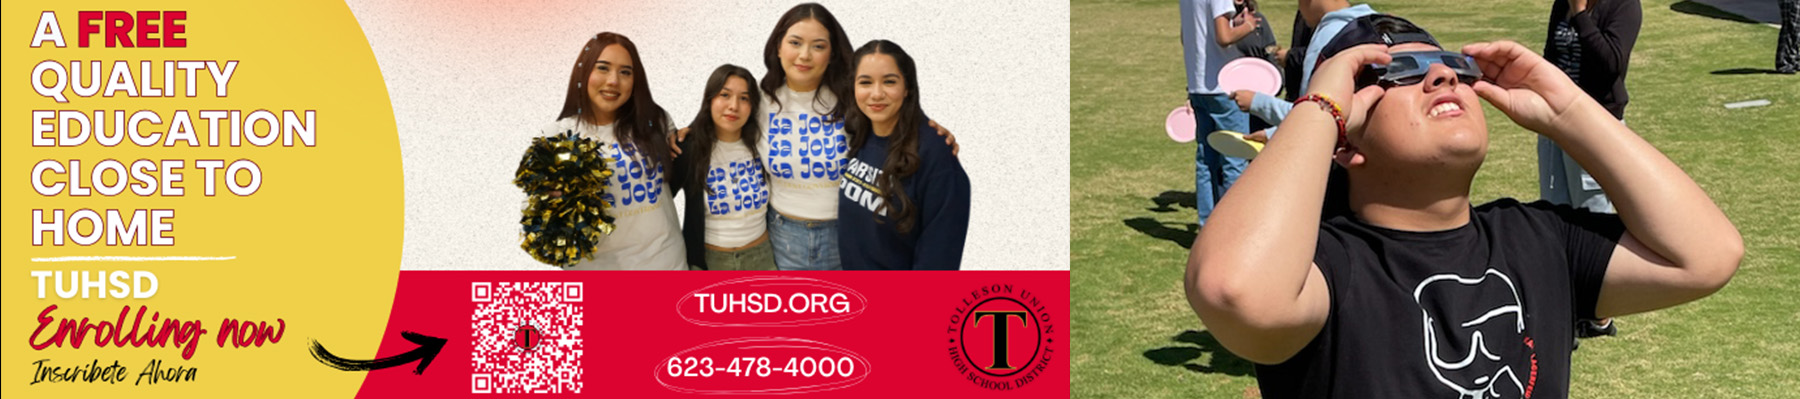 SUPPORT OUR SCHOOLS WITH A TAX CREDIT DONATION! Single person donation of $200 or married joint filing donation of $400 Remember TUHSD when you're filing your taxes! | Students in the classroom